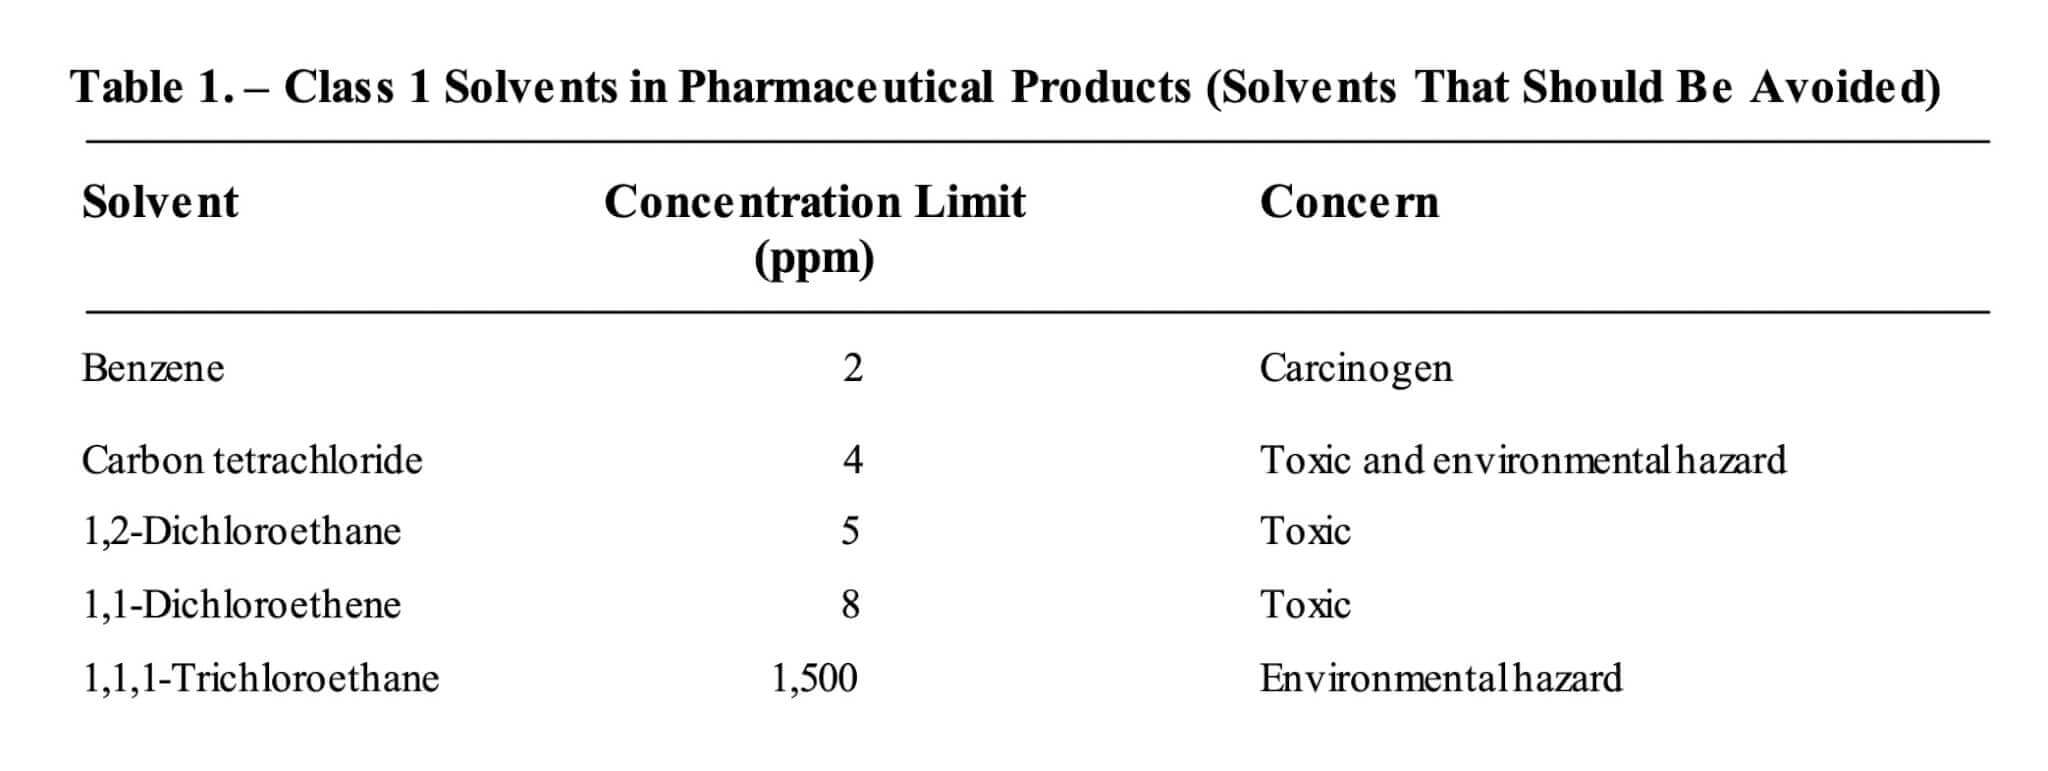 Class 1 Solvents In Pharmaceutical Products